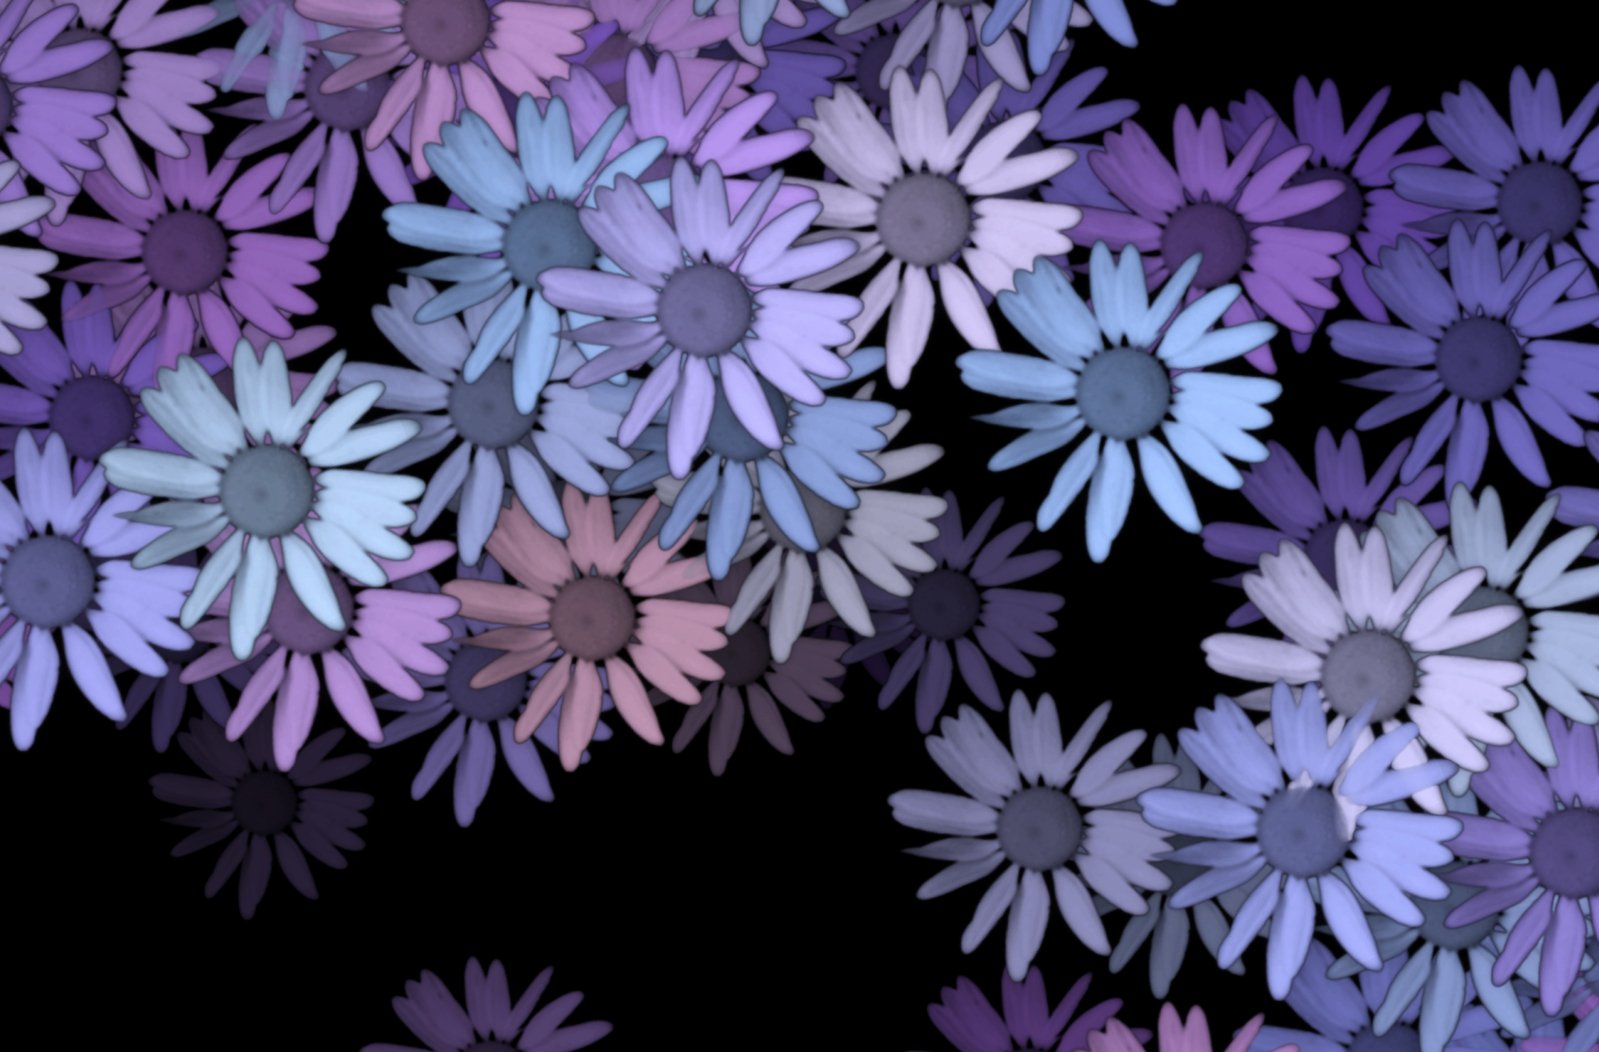 an abstract image of several different colored flowers